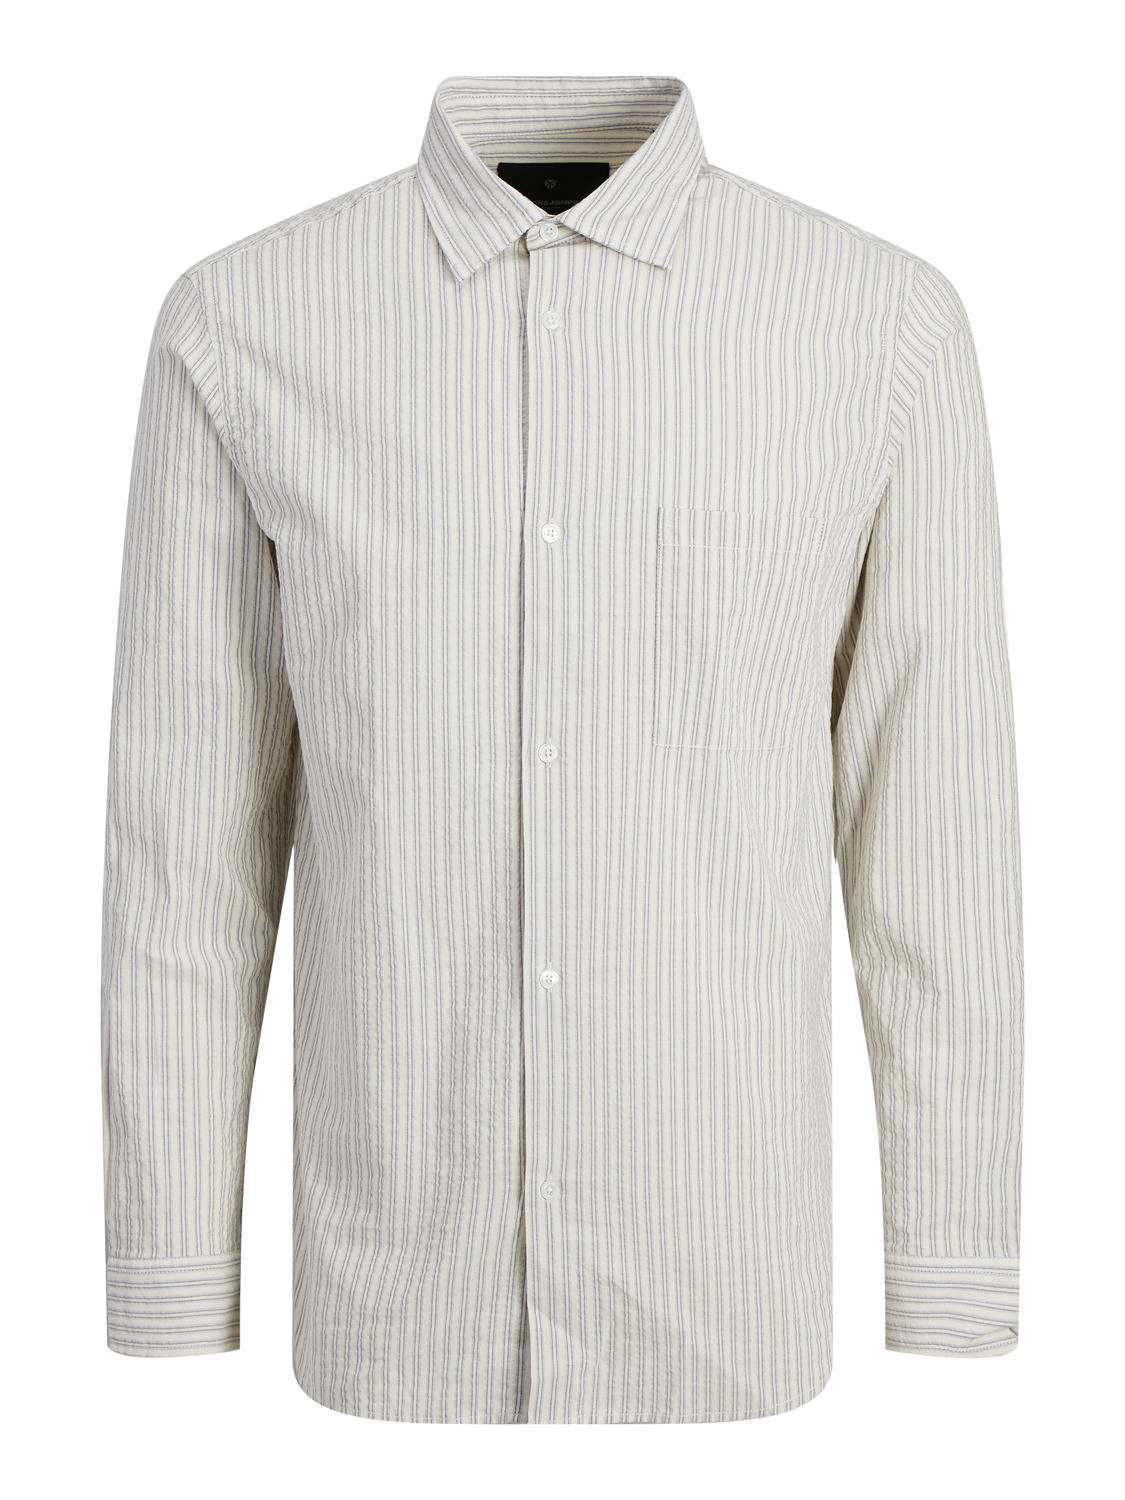 Jack & Jones Relaxed Fit Shirt -Snow White - 12252213